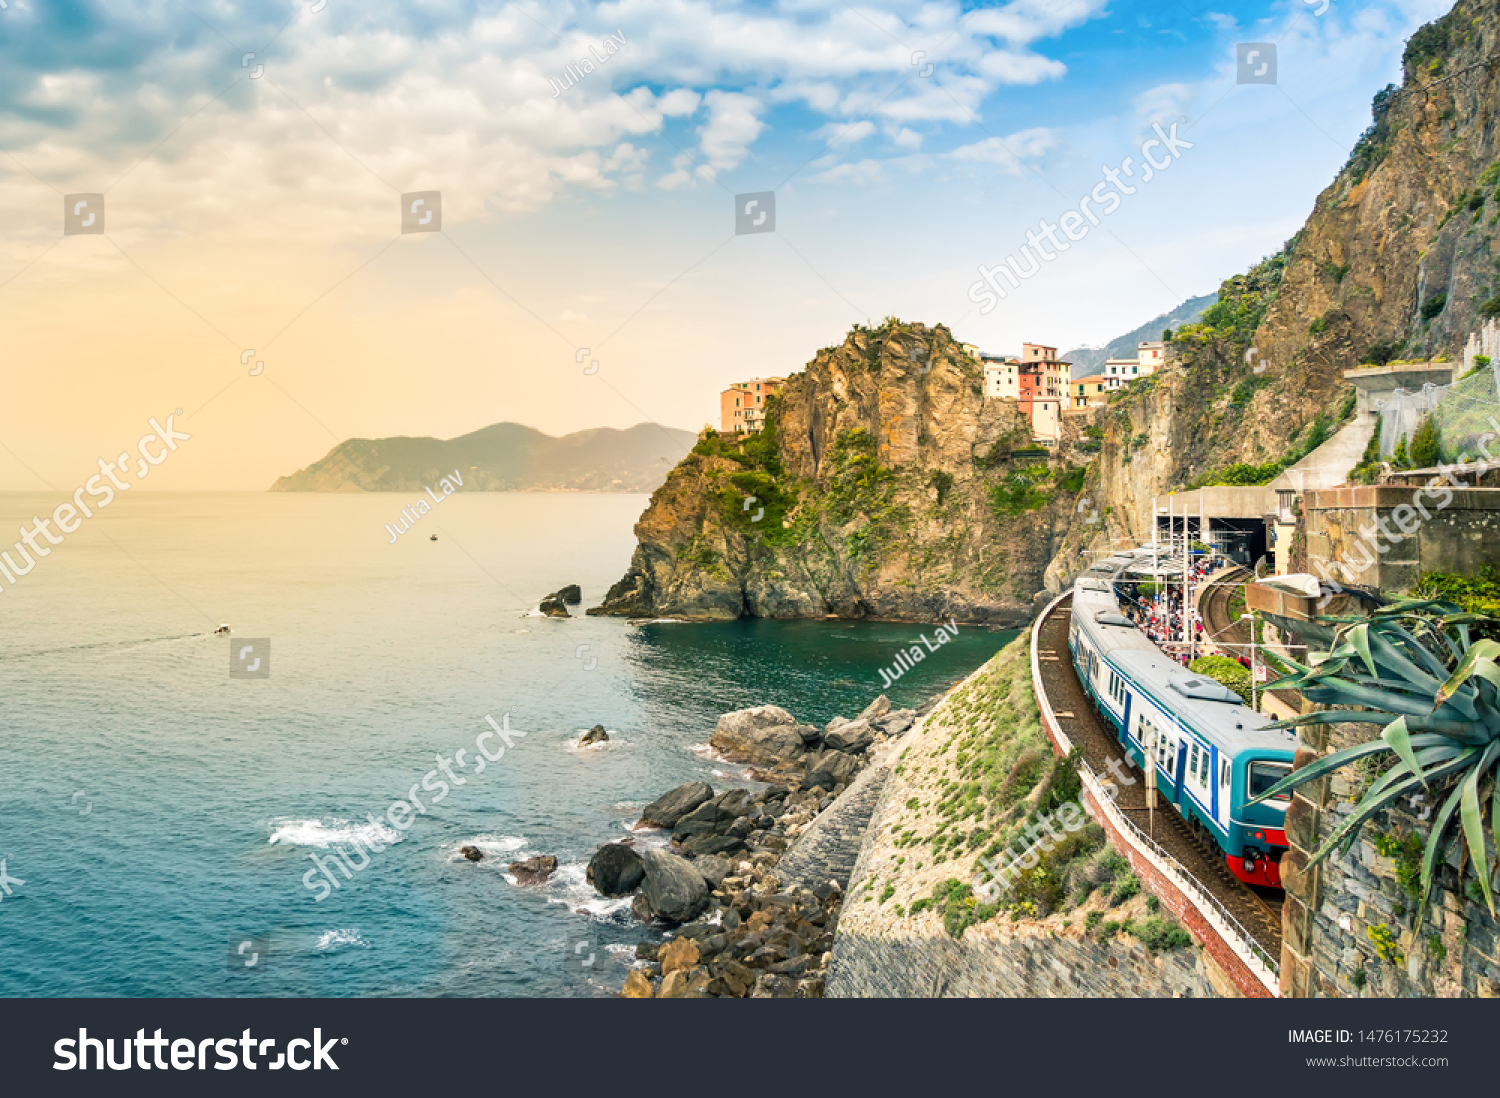 Manarola, Cinque Terre - train station in small village with colorful houses on cliff overlooking sea. Cinque Terre National Park with rugged coastline is famous tourist destination in Liguria, Italy #1476175232